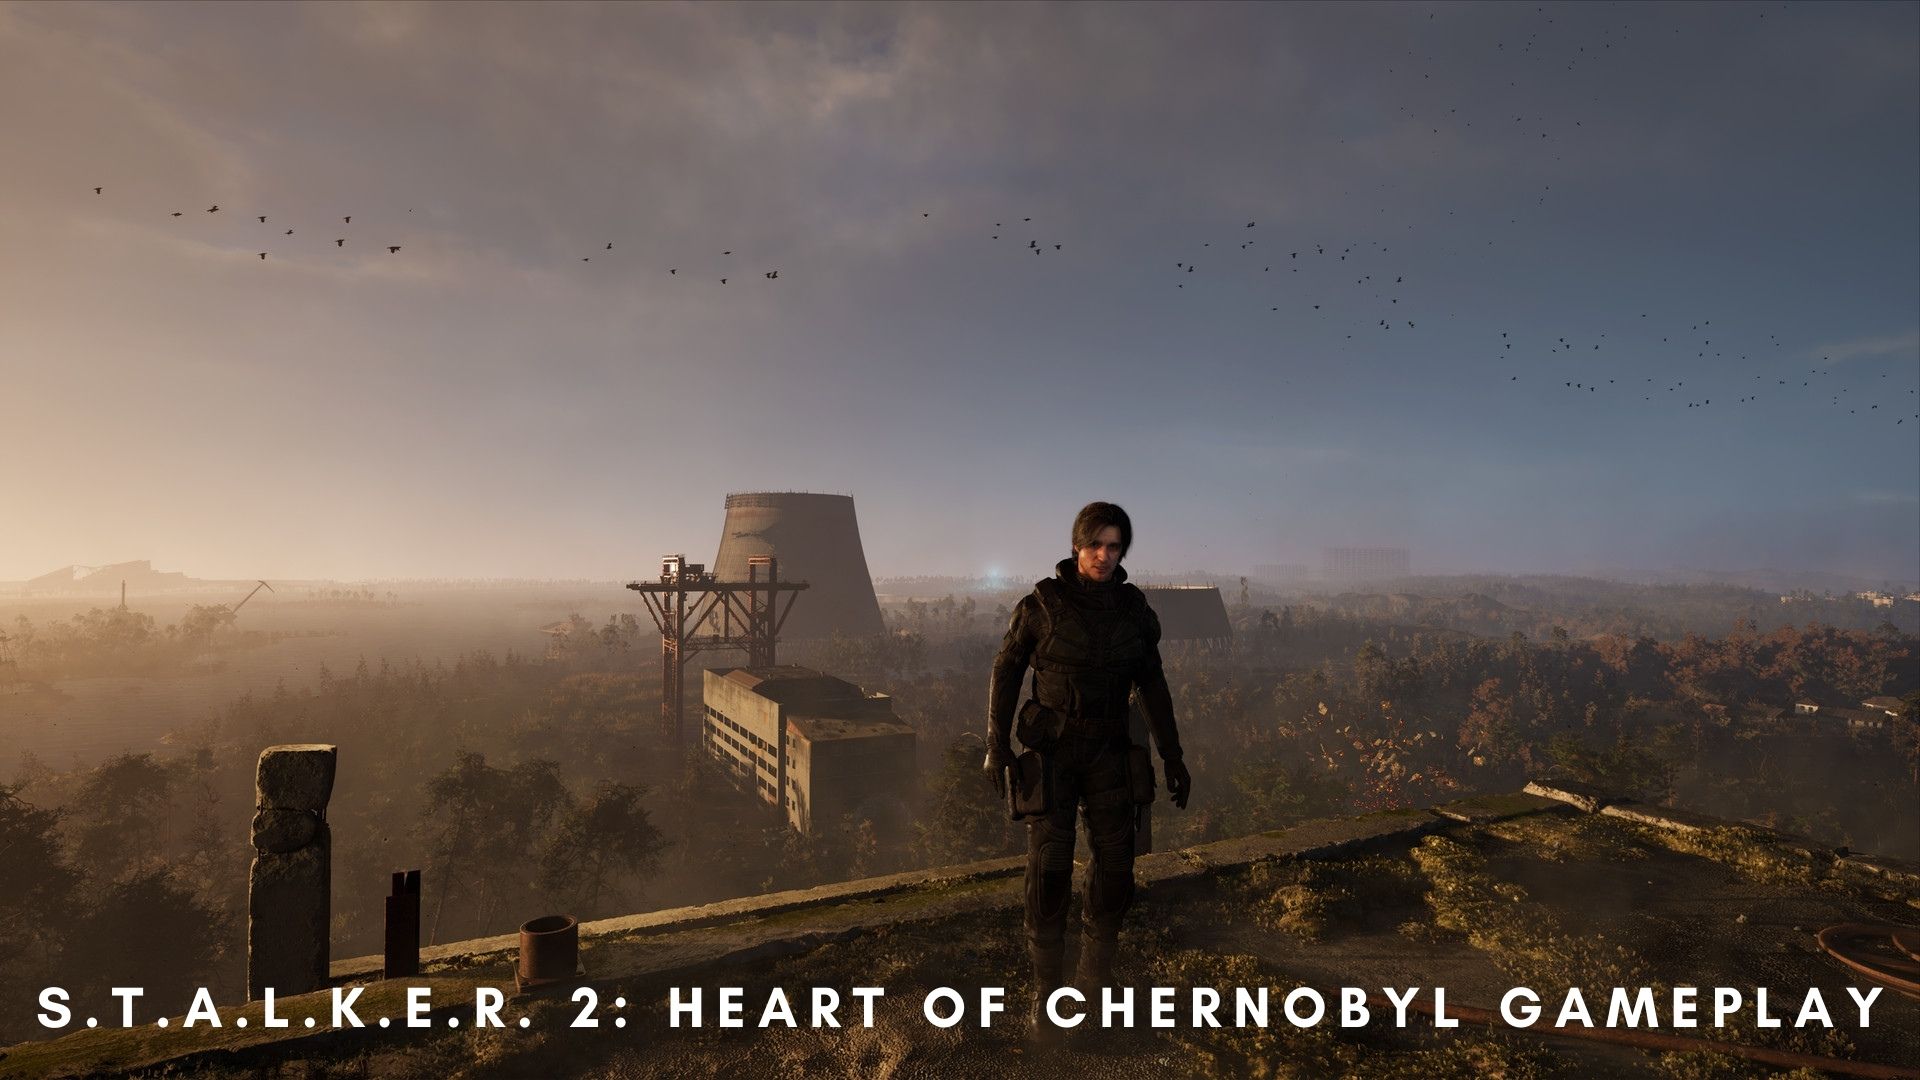 S.T.A.L.K.E.R. 2: Heart of Chernobyl Release Date 